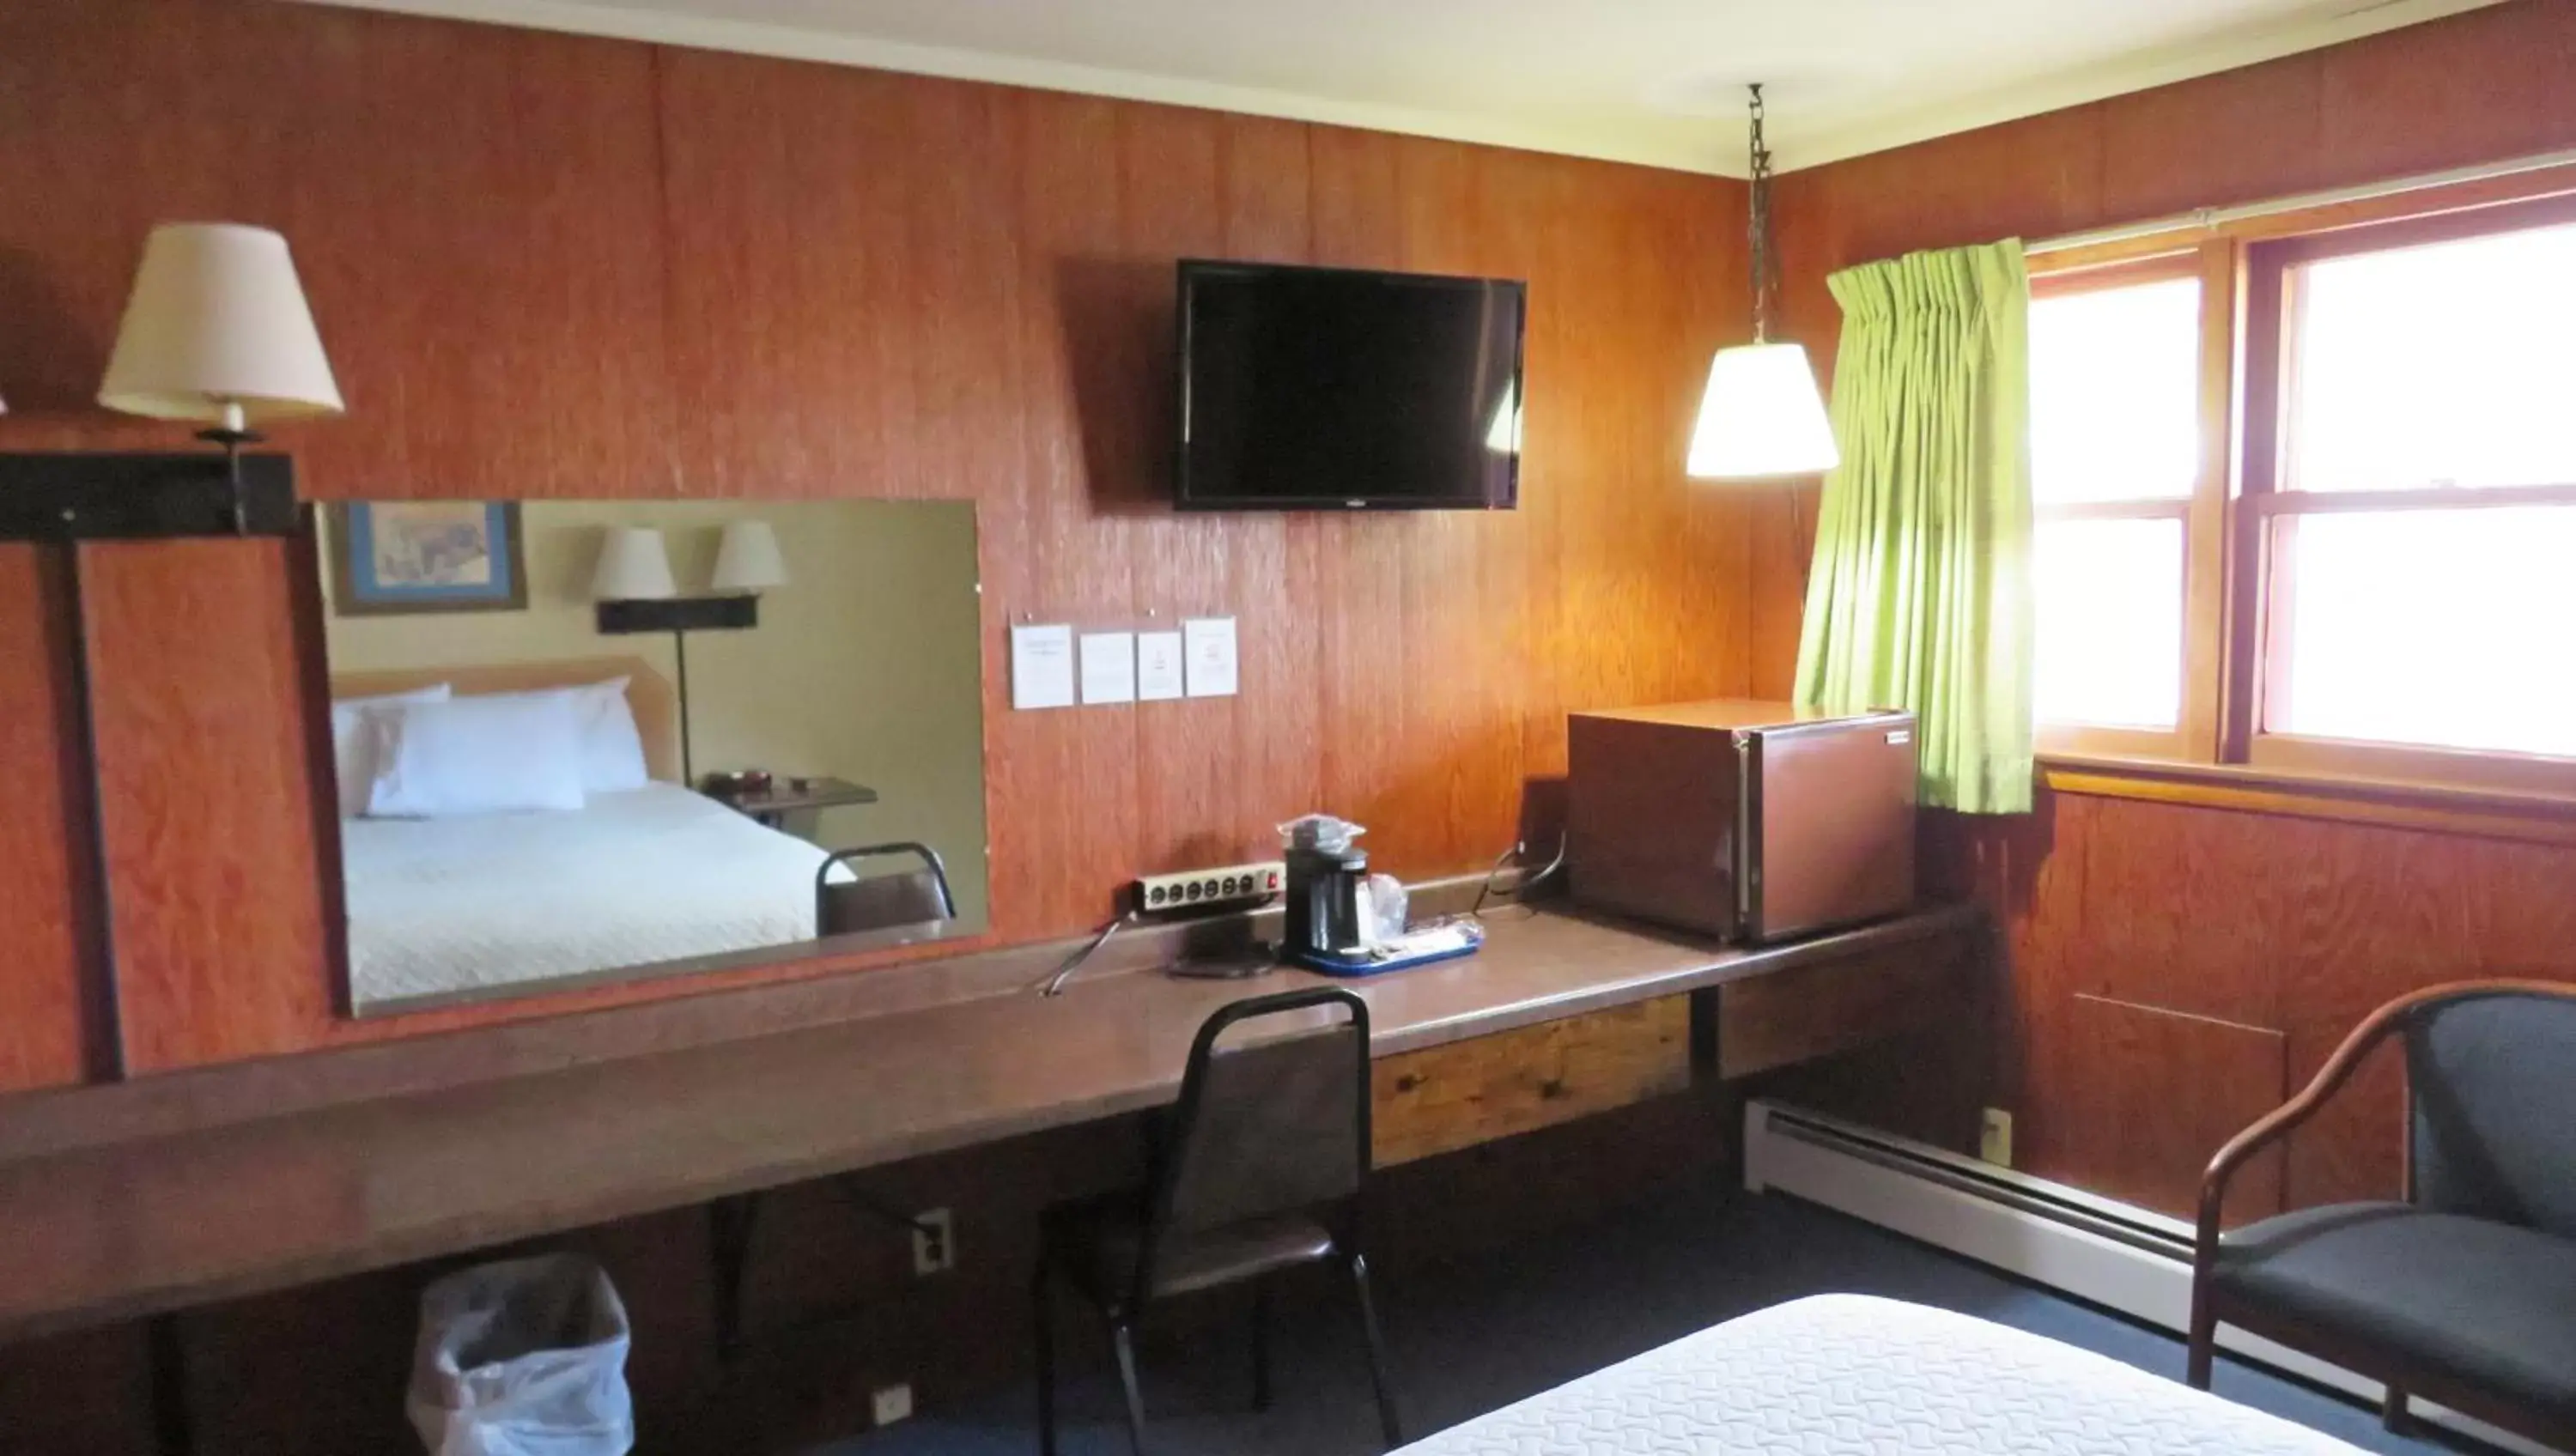 Bedroom, TV/Entertainment Center in Indianhead Ironwood Hotel